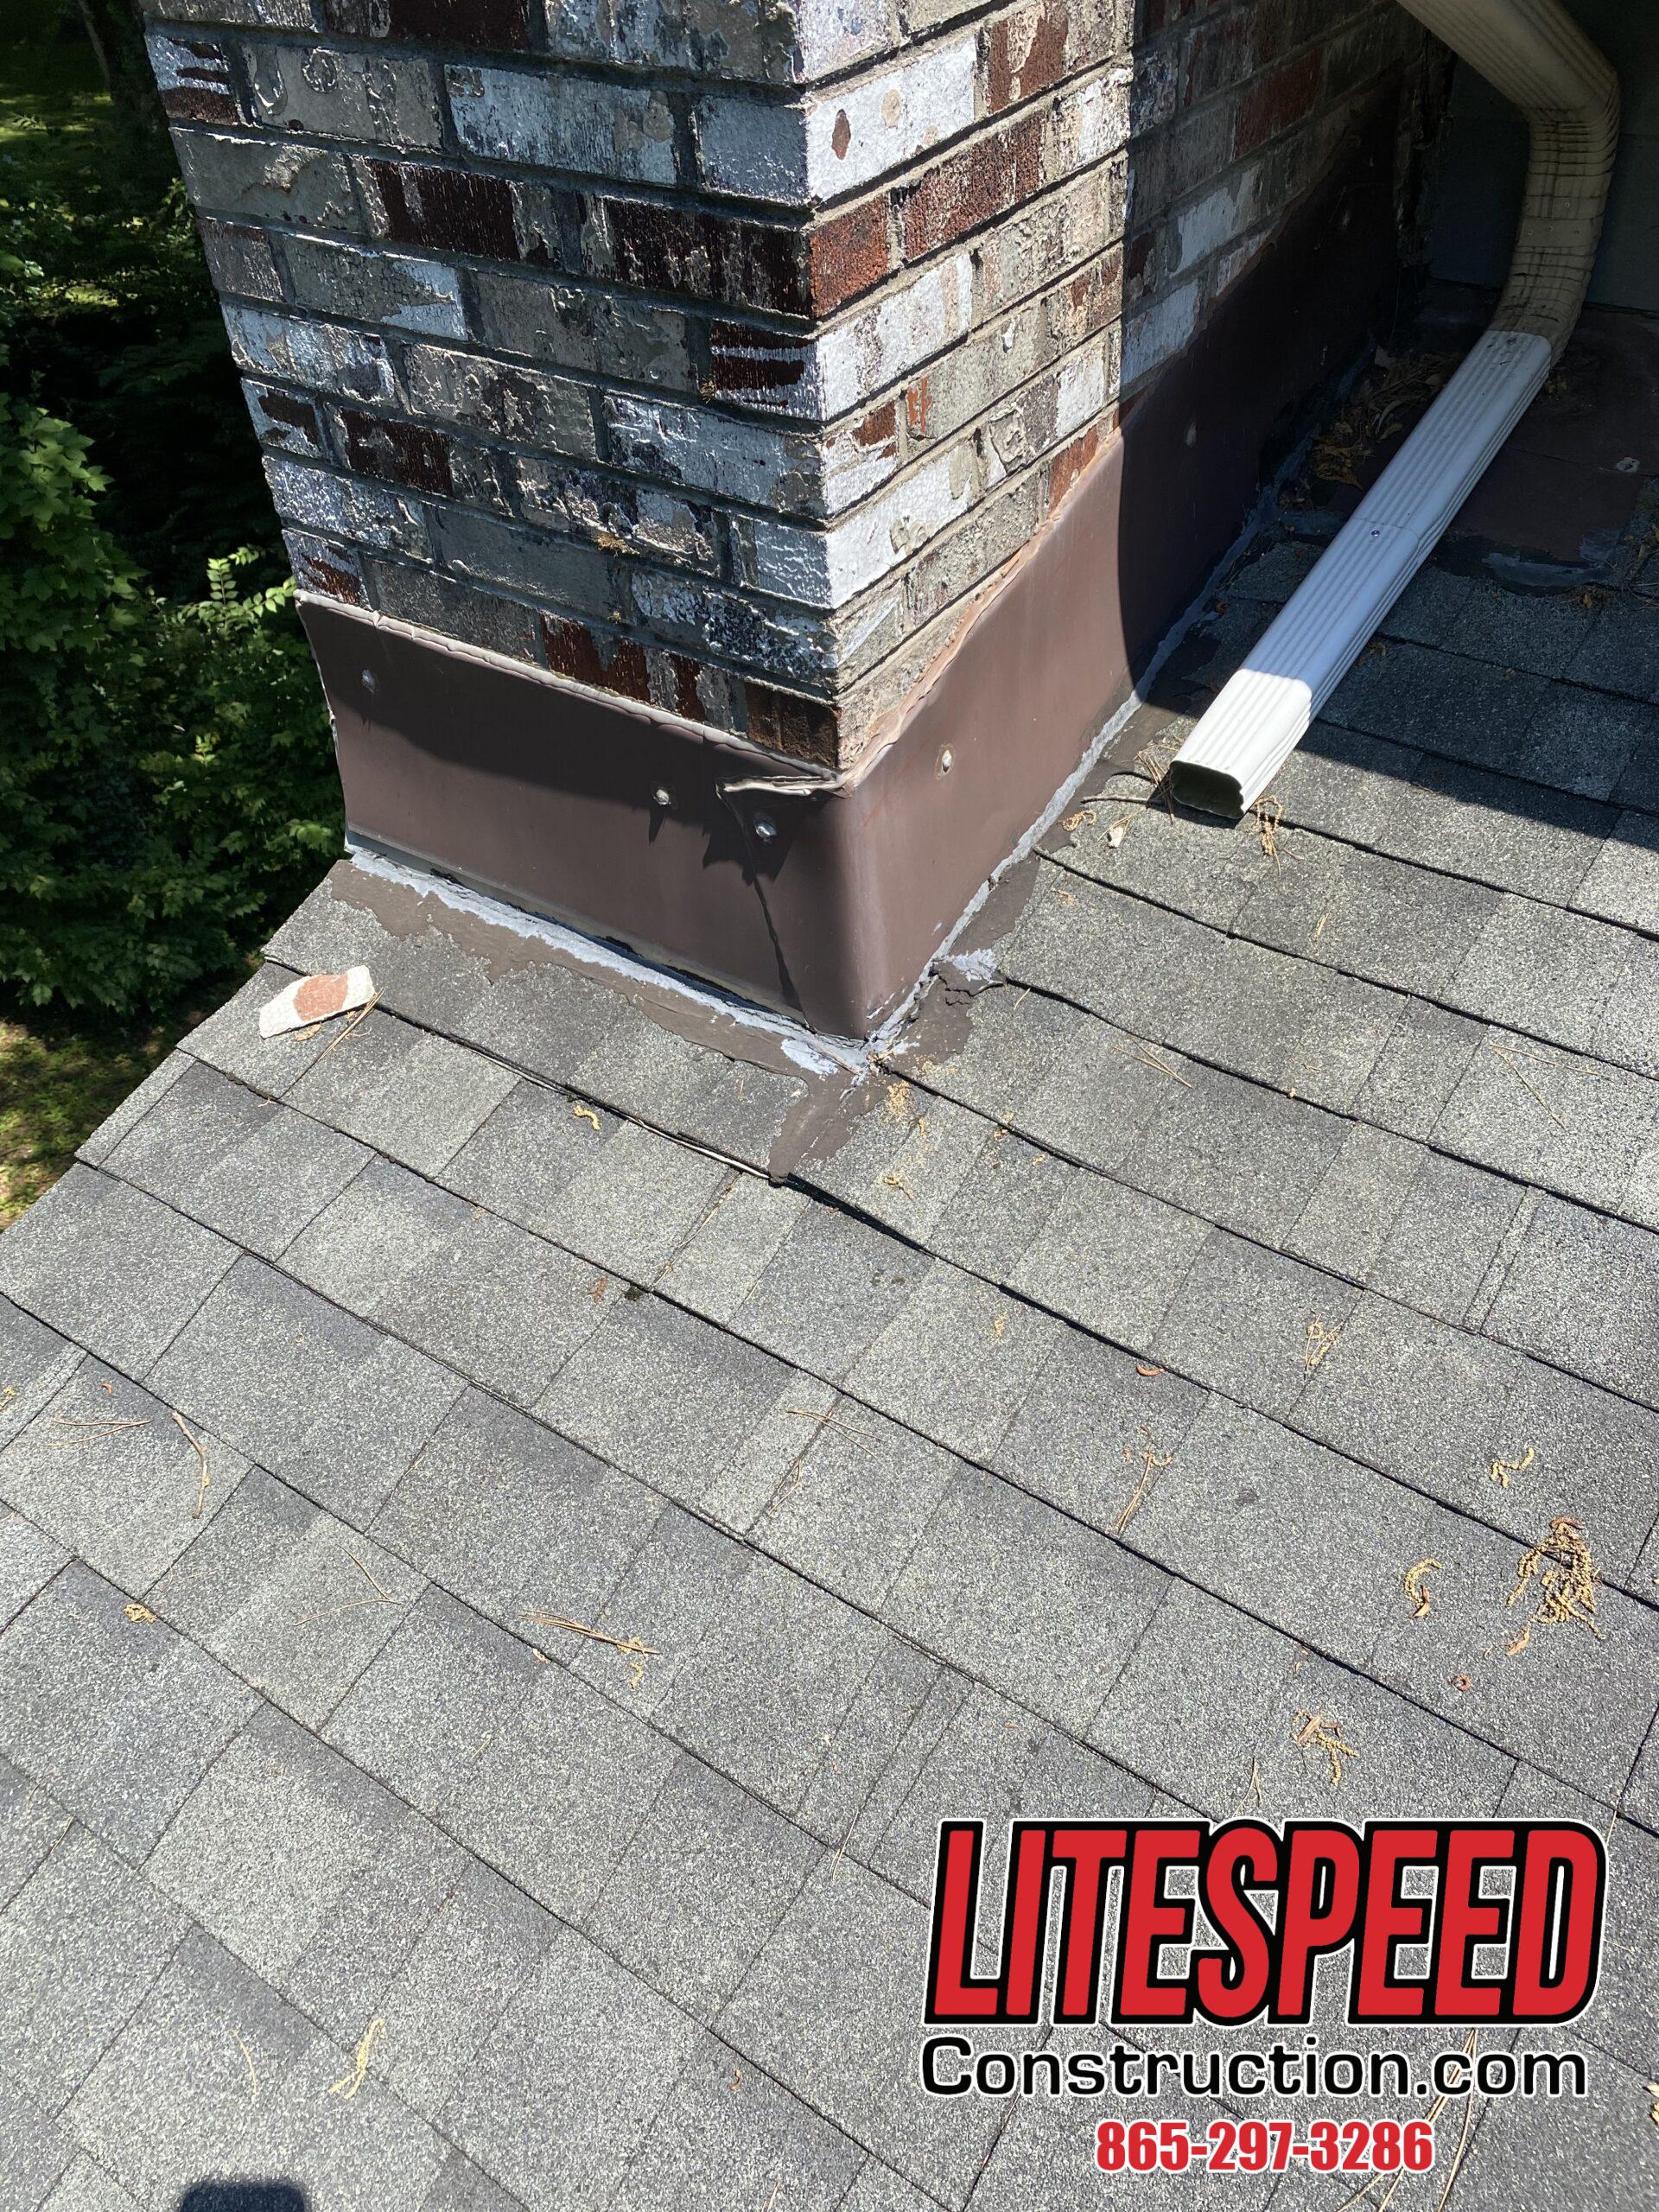 This is a picture of brow chimney flashing on a gray dimensional shingle roof